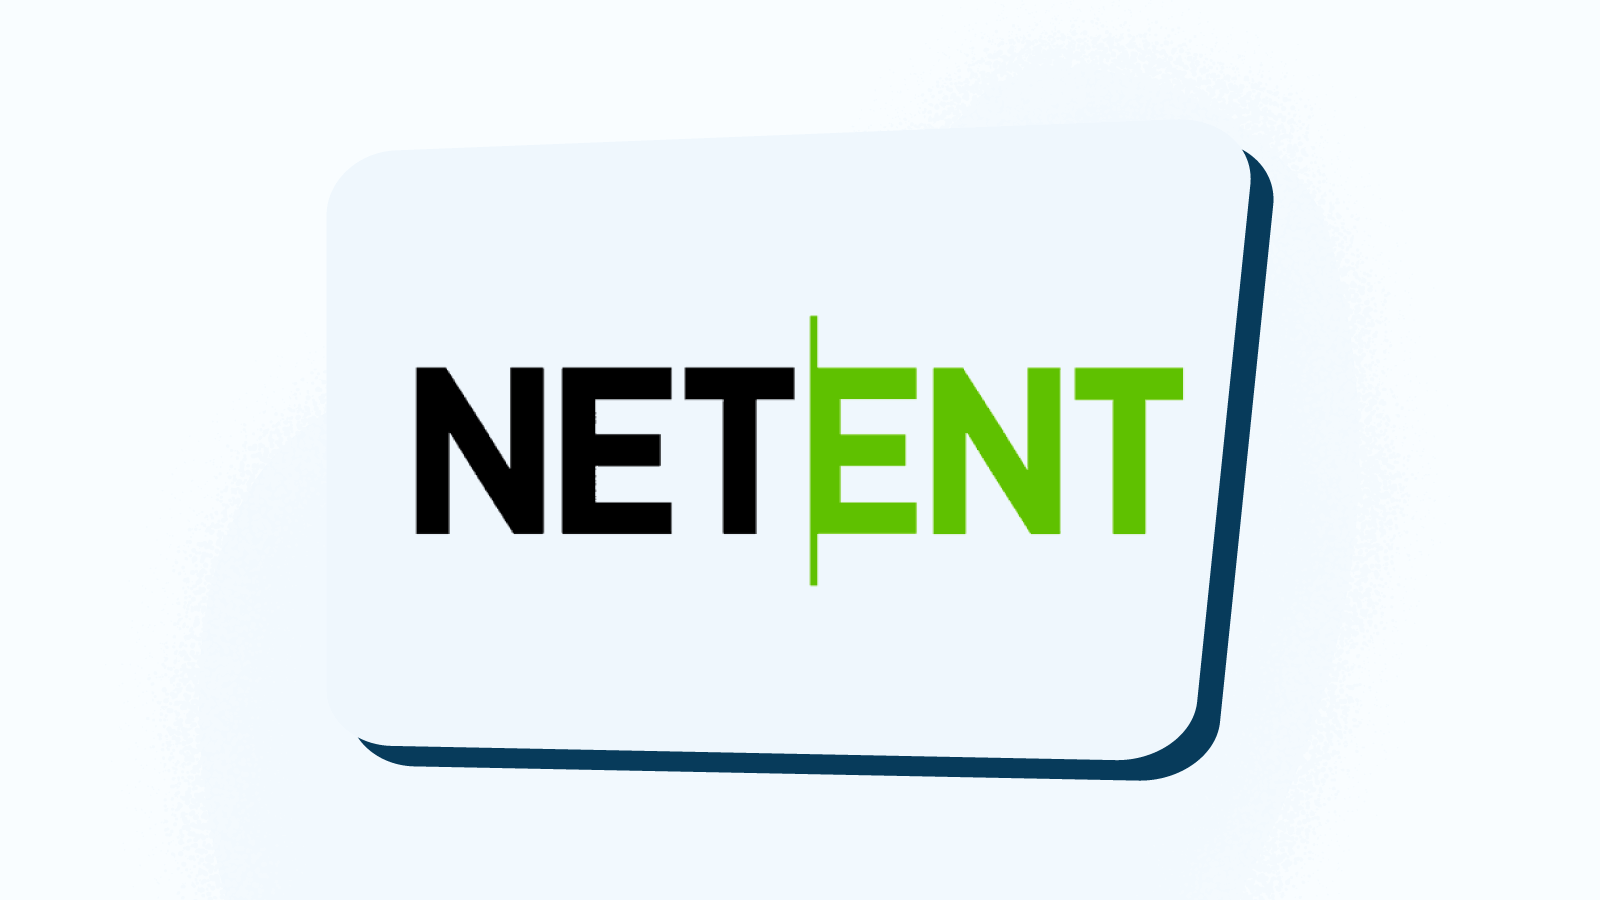 Newest slots from Netent